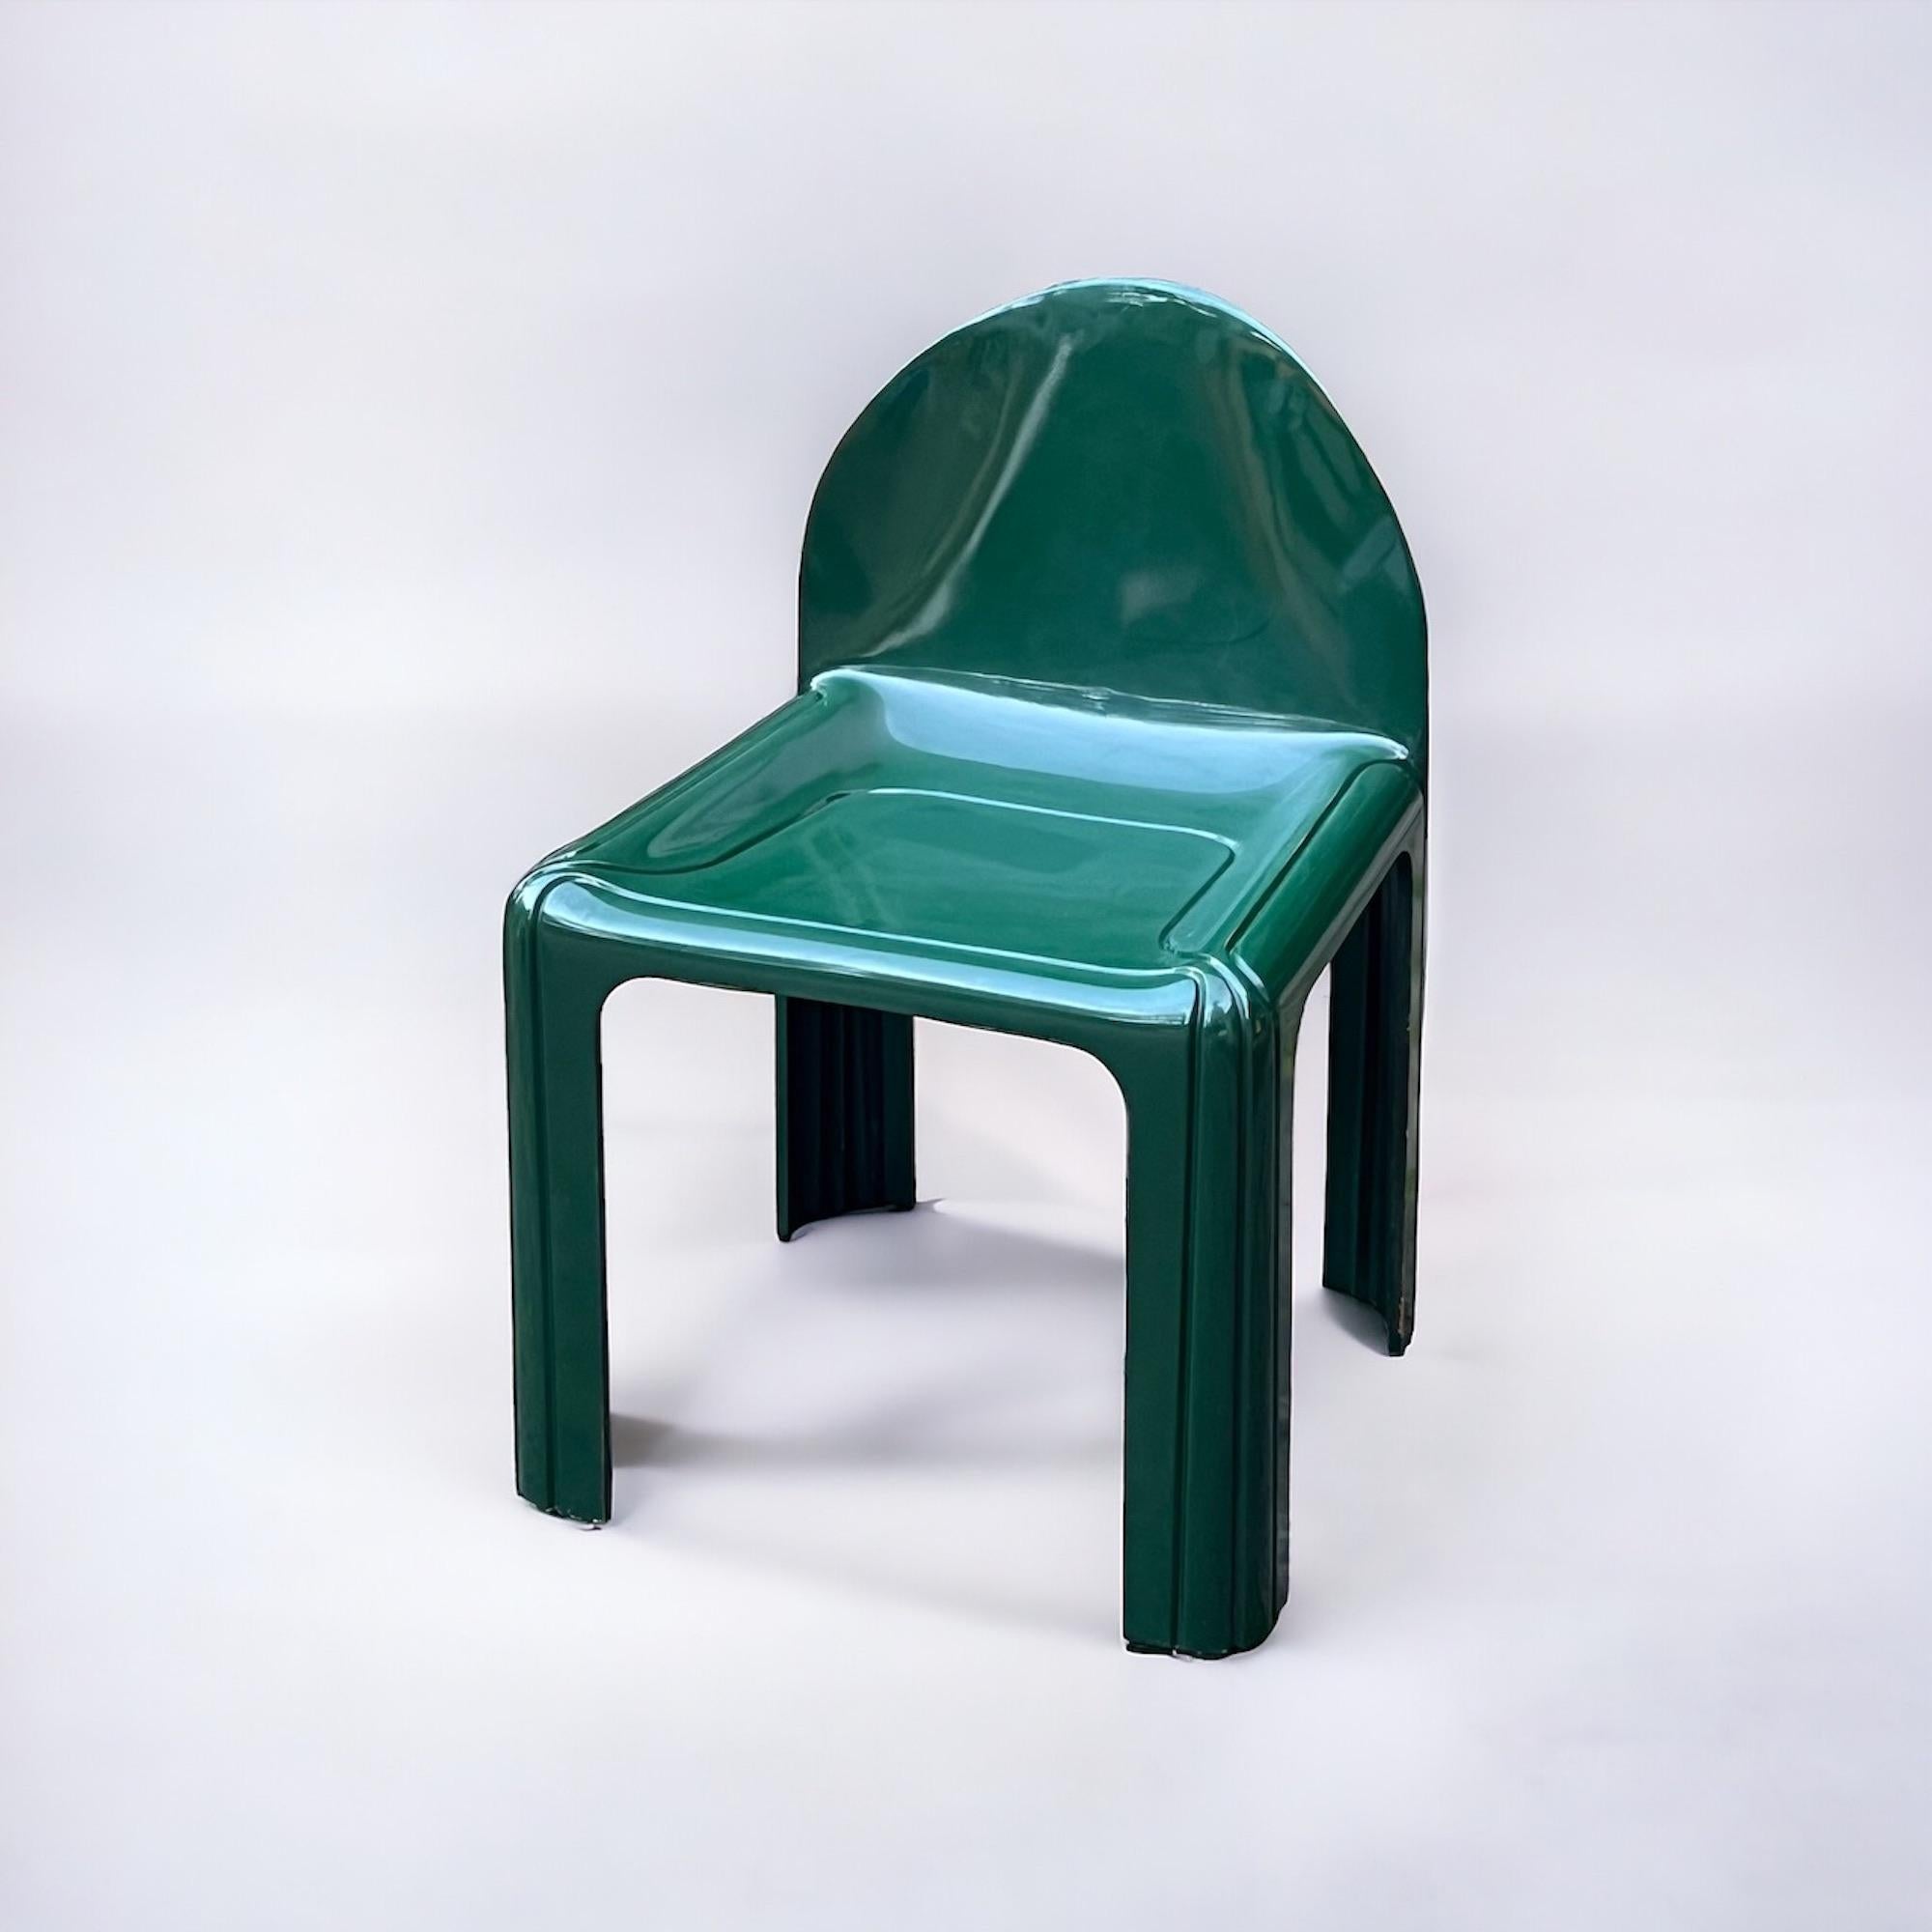 Mid-Century Modern Kartell Model 4854 Chairs by Gae Aulenti, 1960s - Set of 4 - Emerald Green Resin For Sale